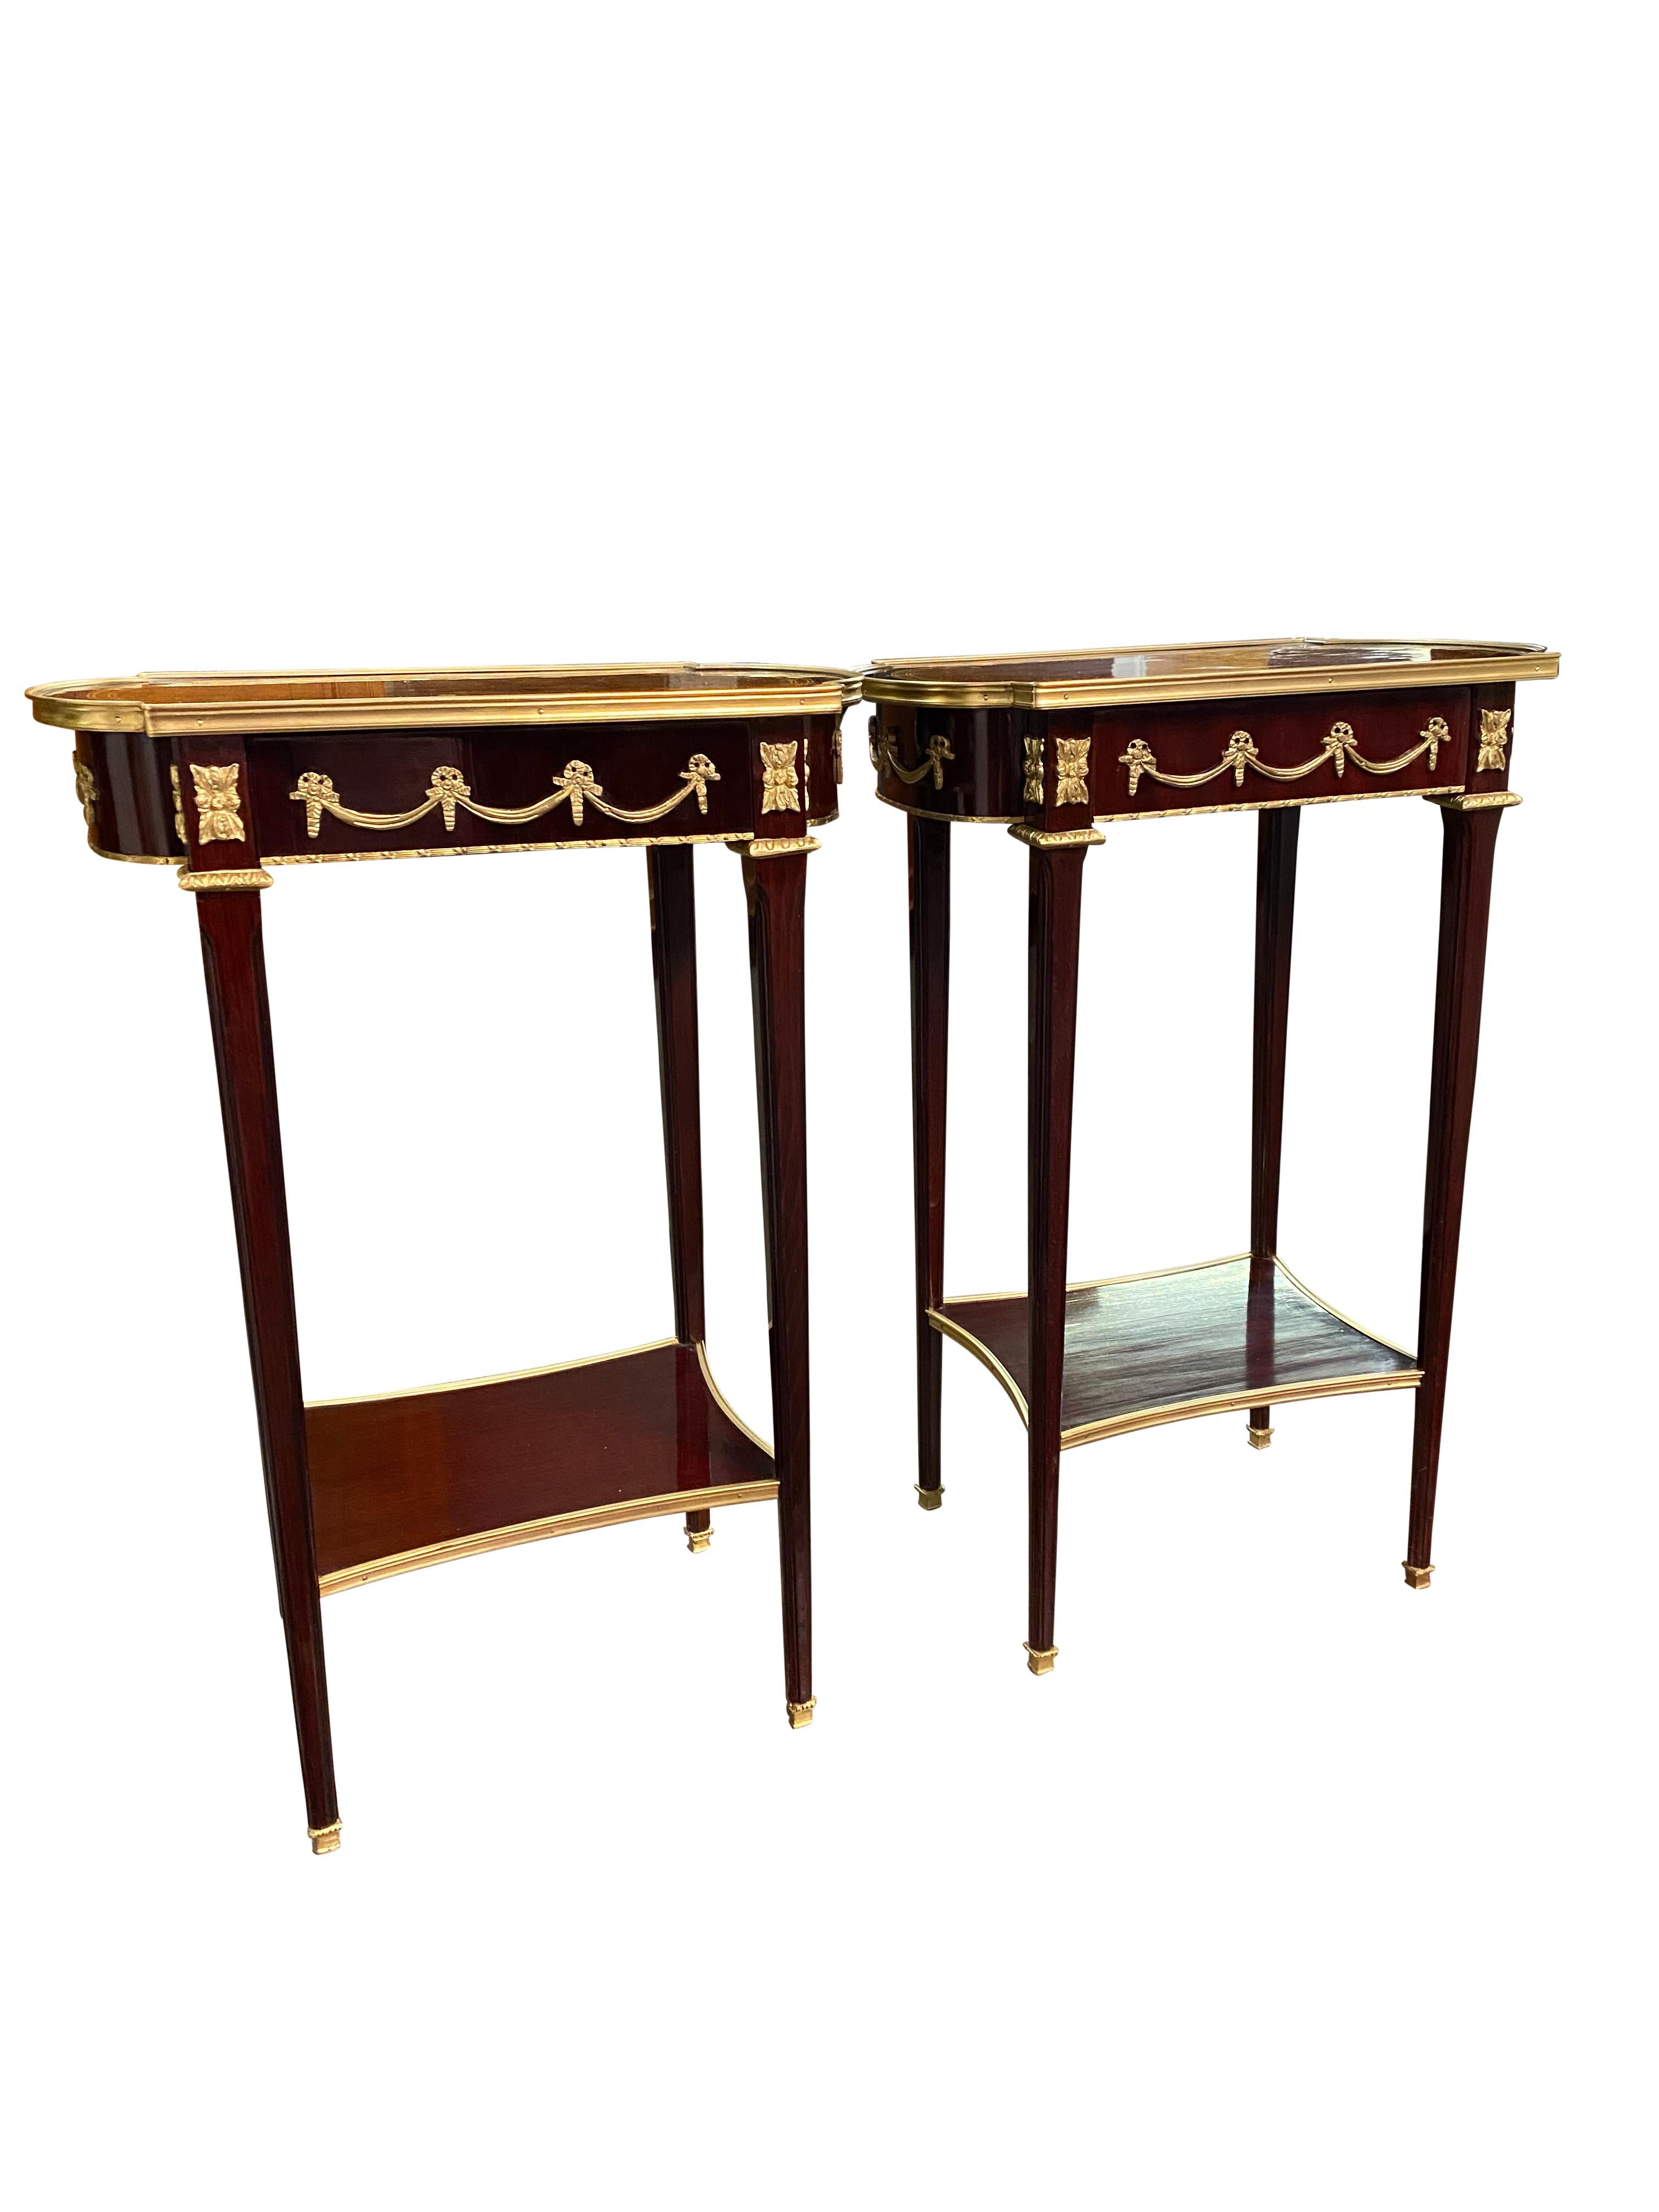 A stunning Pair of 20th century Empire style side tables. A gorgeous and elegant design perfect for modern interiors.